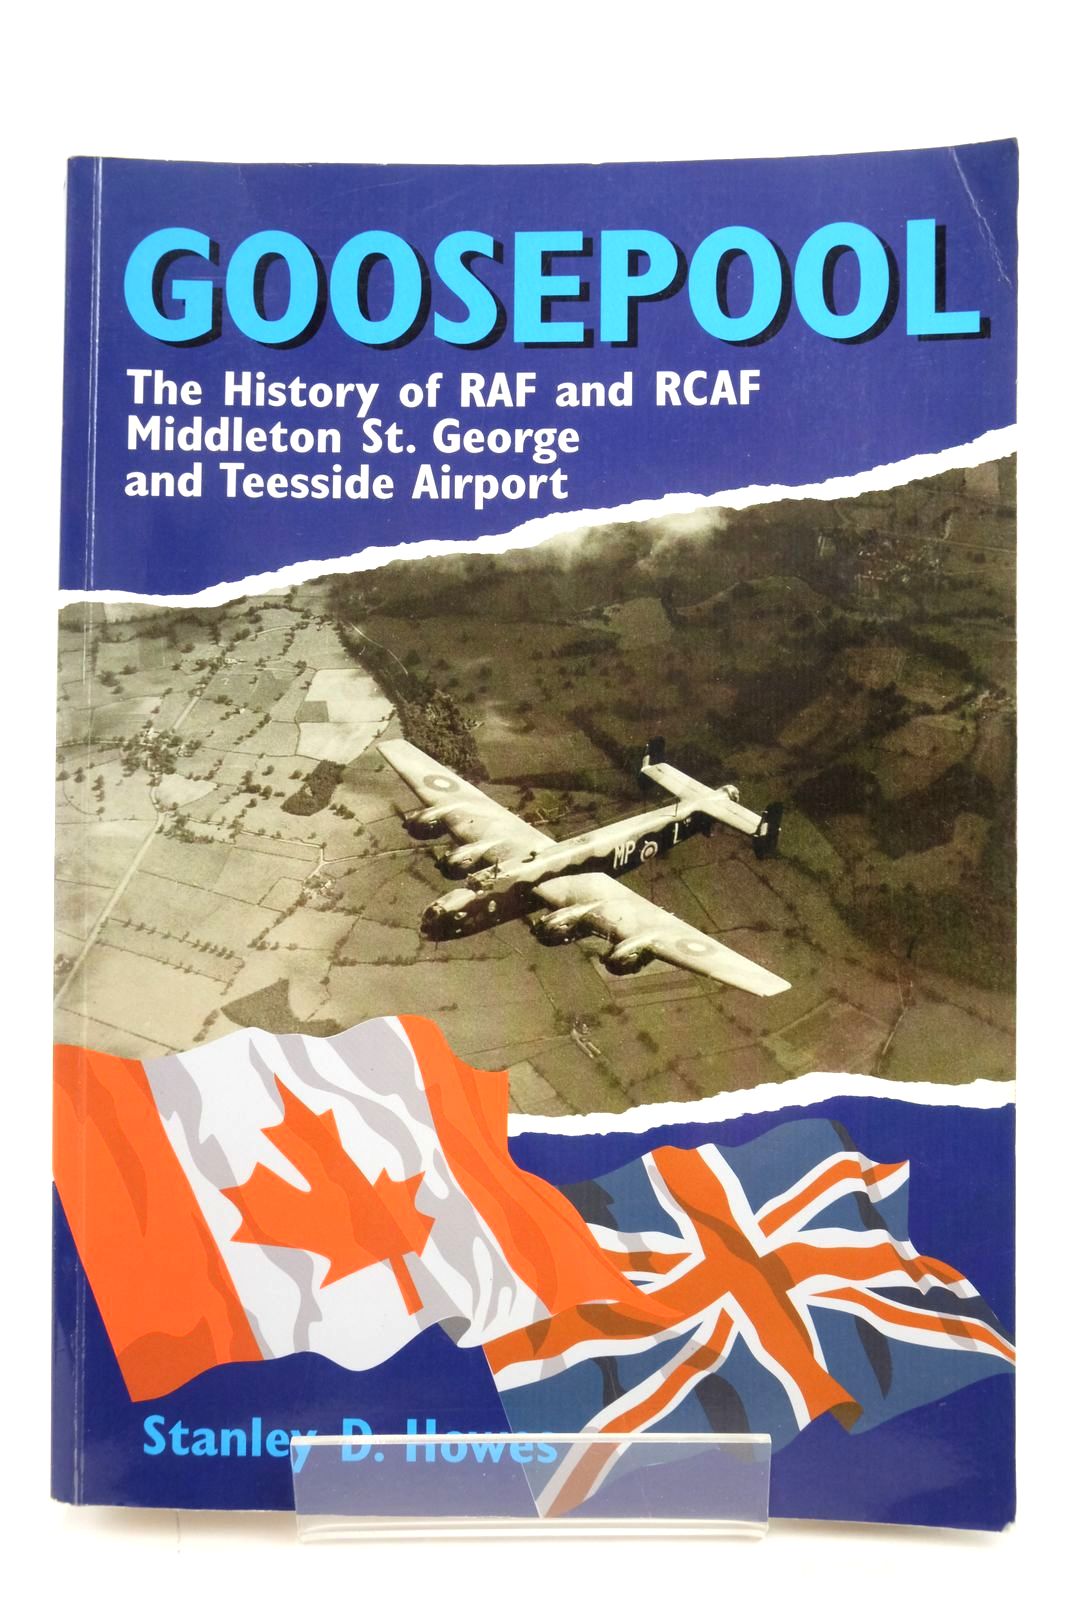 Photo of GOOSEPOOL written by Howes, Stanley D. published by Stanley Books (STOCK CODE: 2136585)  for sale by Stella & Rose's Books